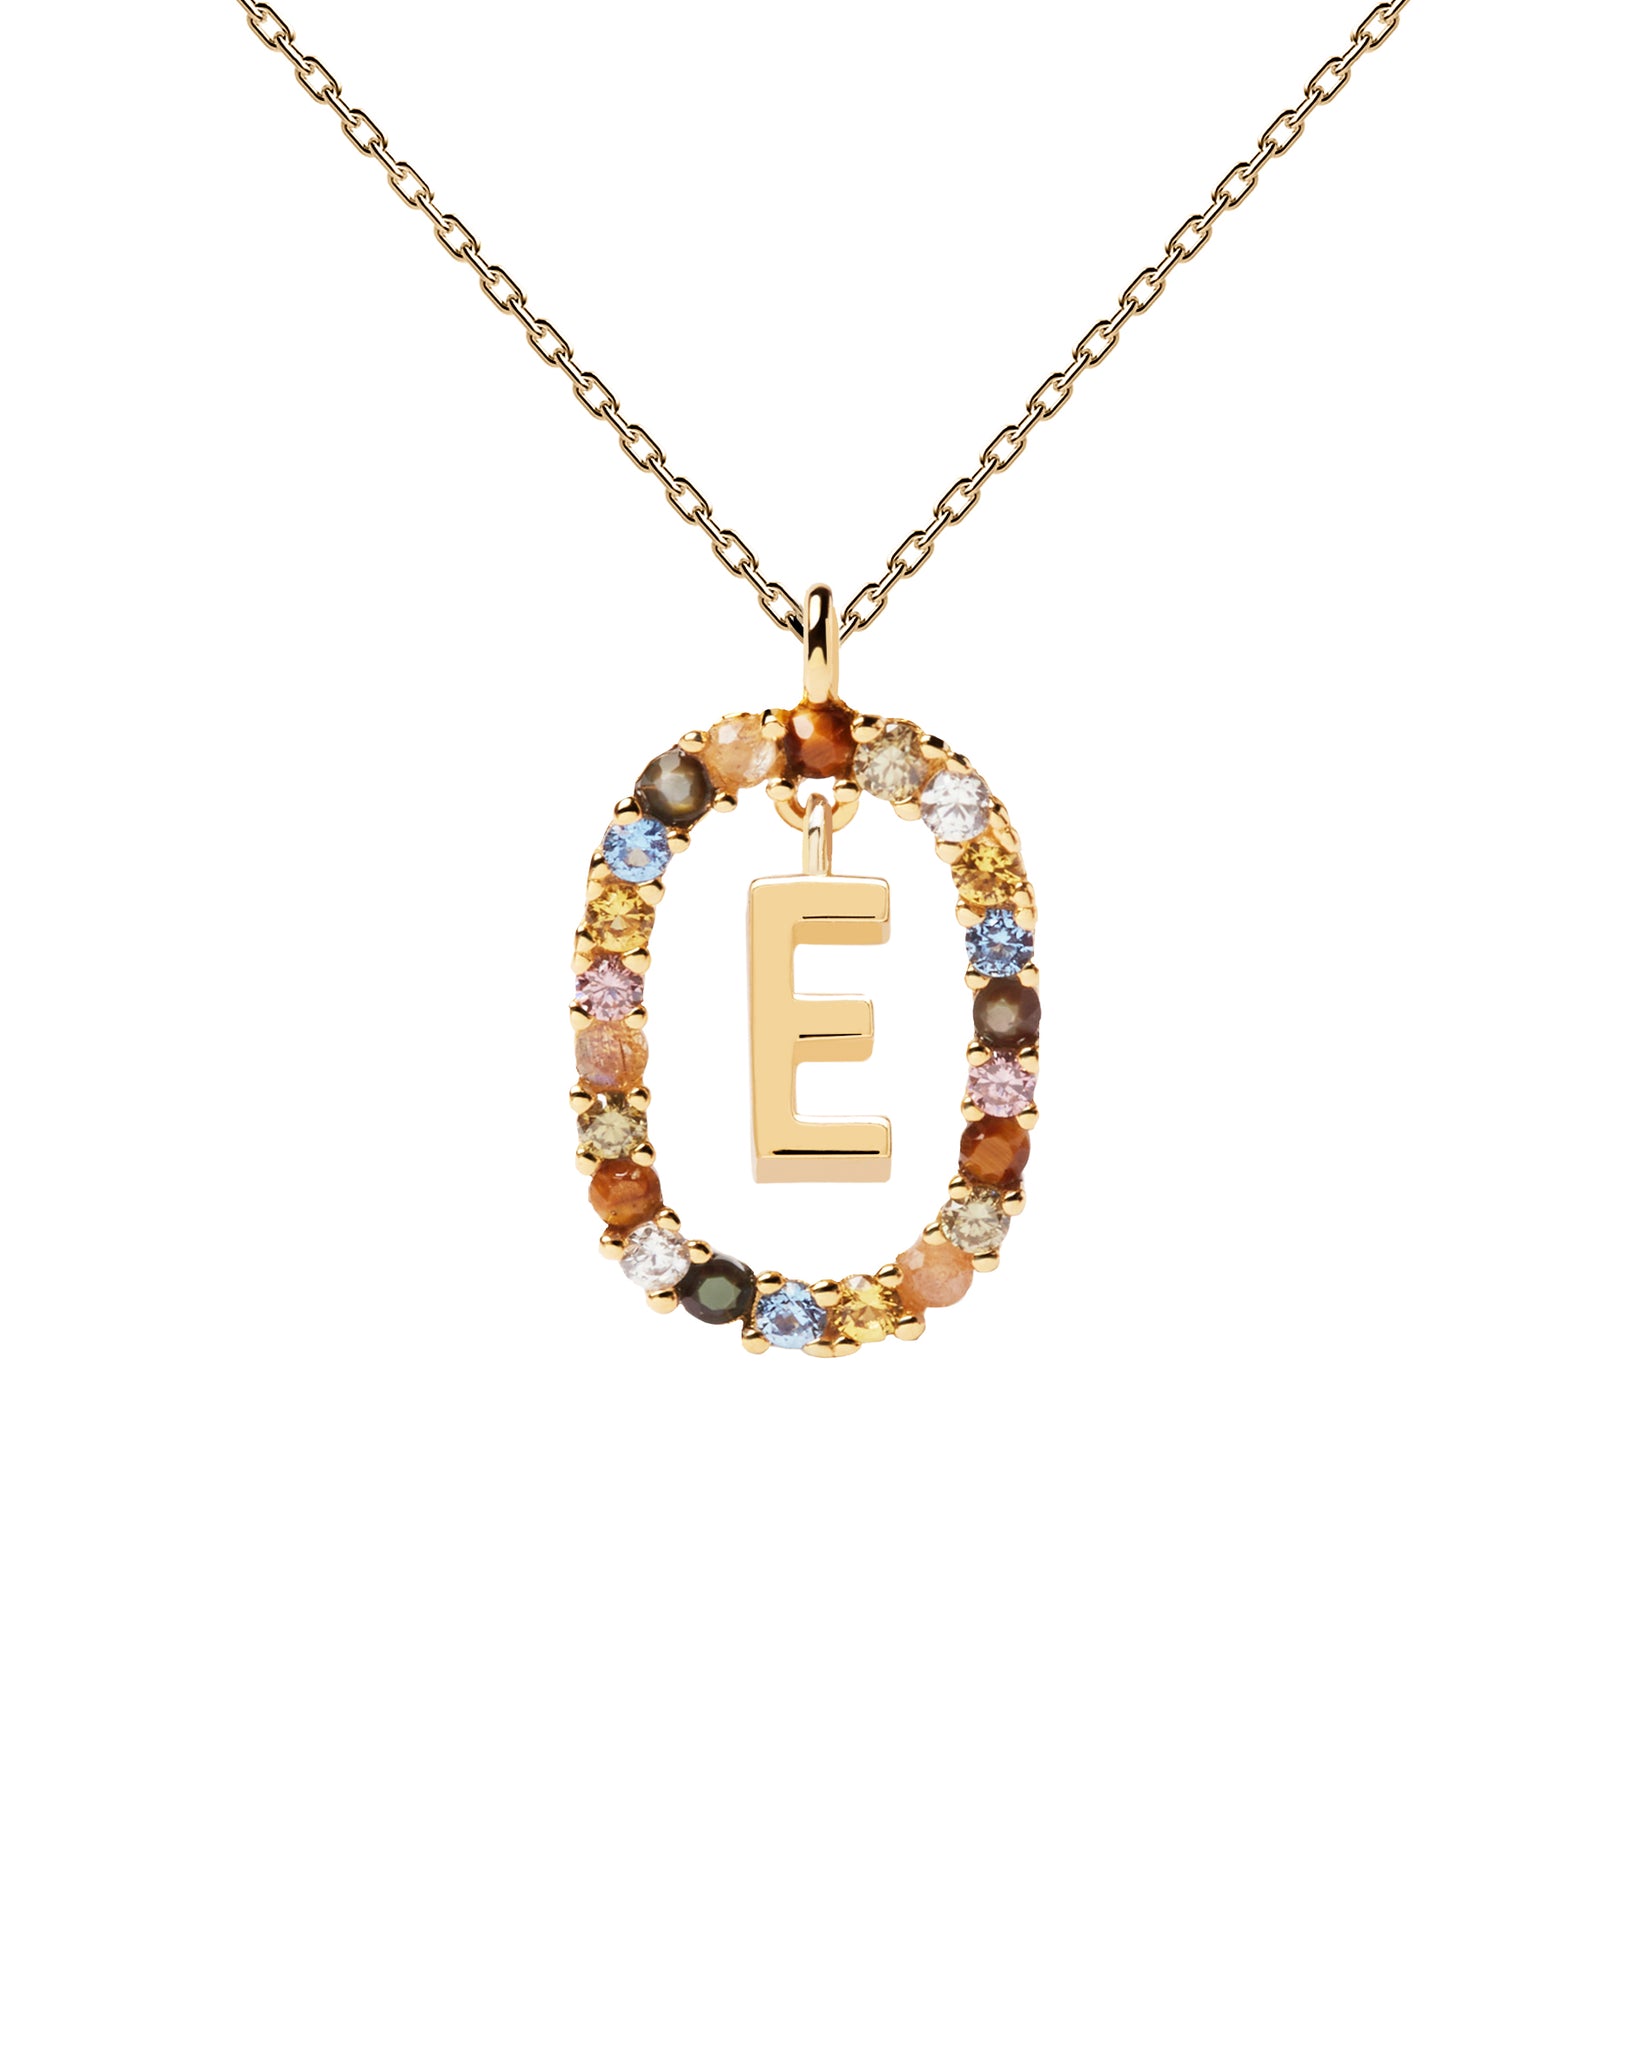 PDPAOLA Letter E Necklace - 925 Sterling Silver / 18K Gold Plating with Gemstones